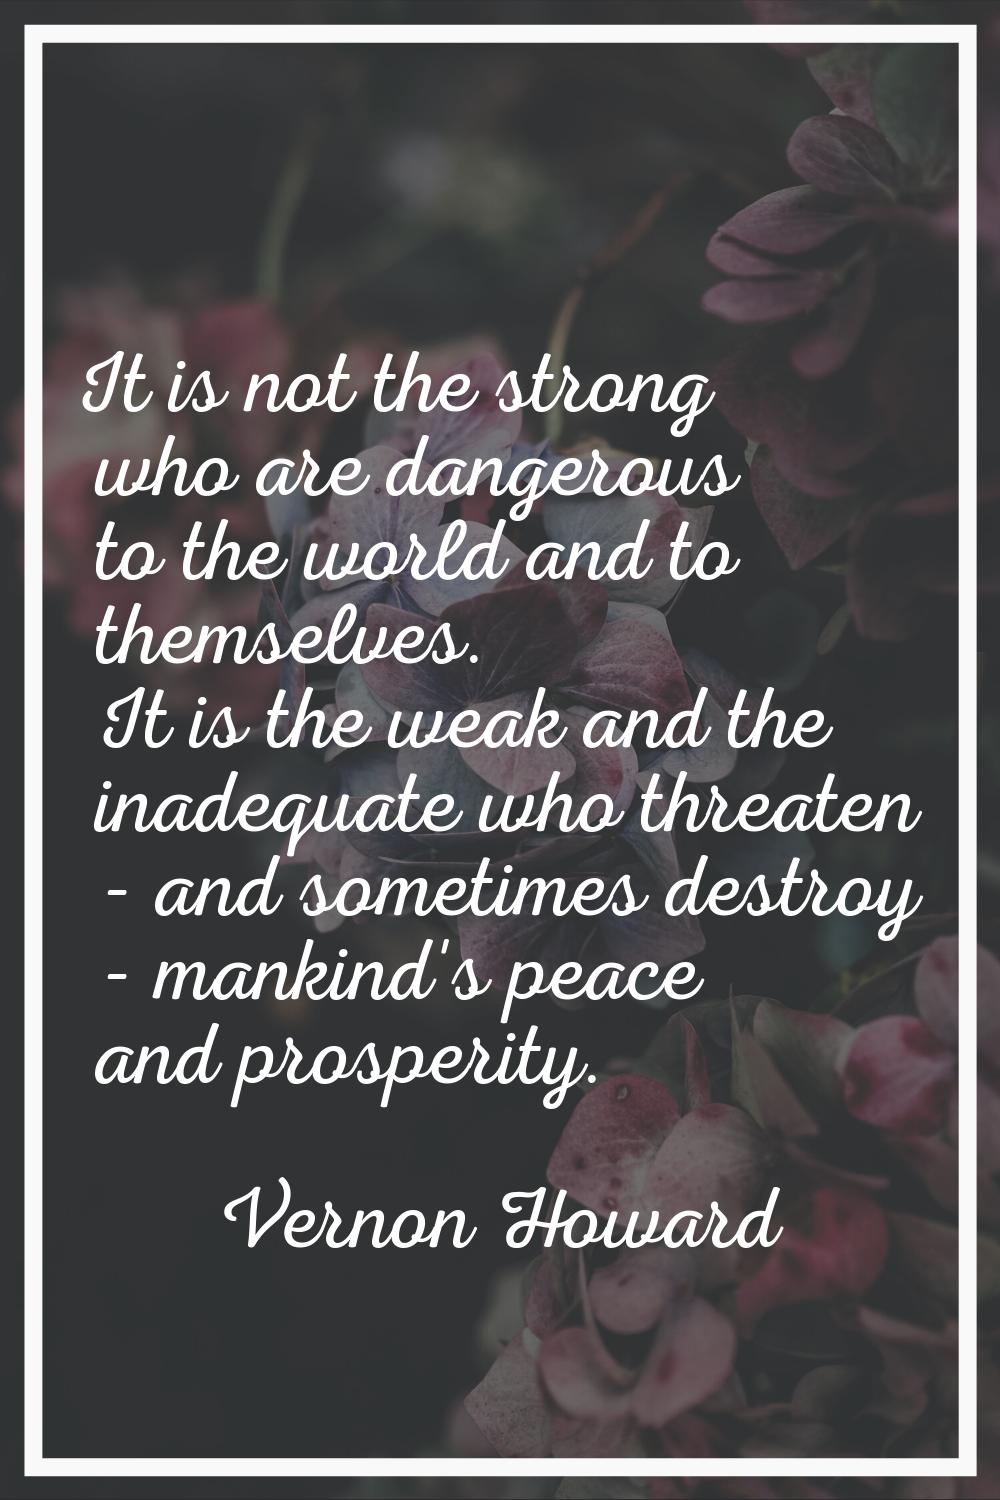 It is not the strong who are dangerous to the world and to themselves. It is the weak and the inade